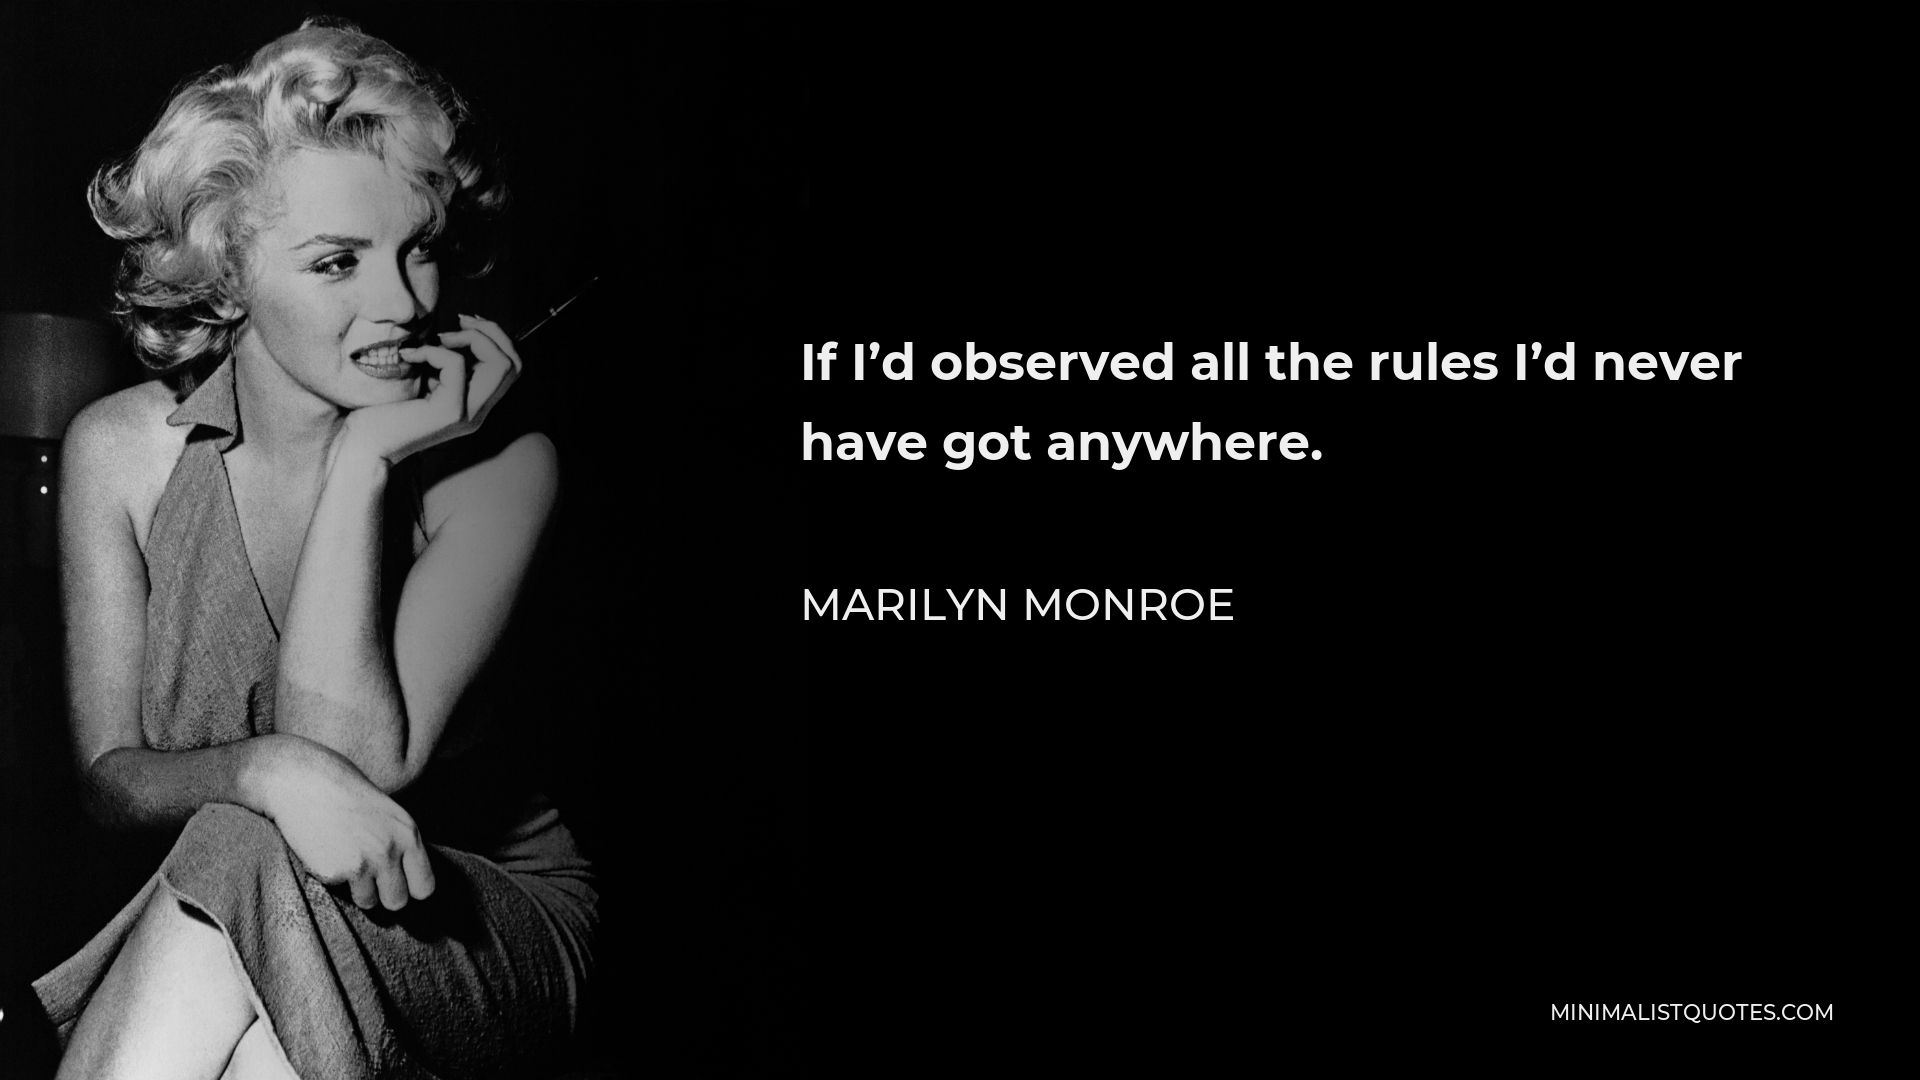 Marilyn Monroe Quote - If I’d observed all the rules I’d never have got anywhere.